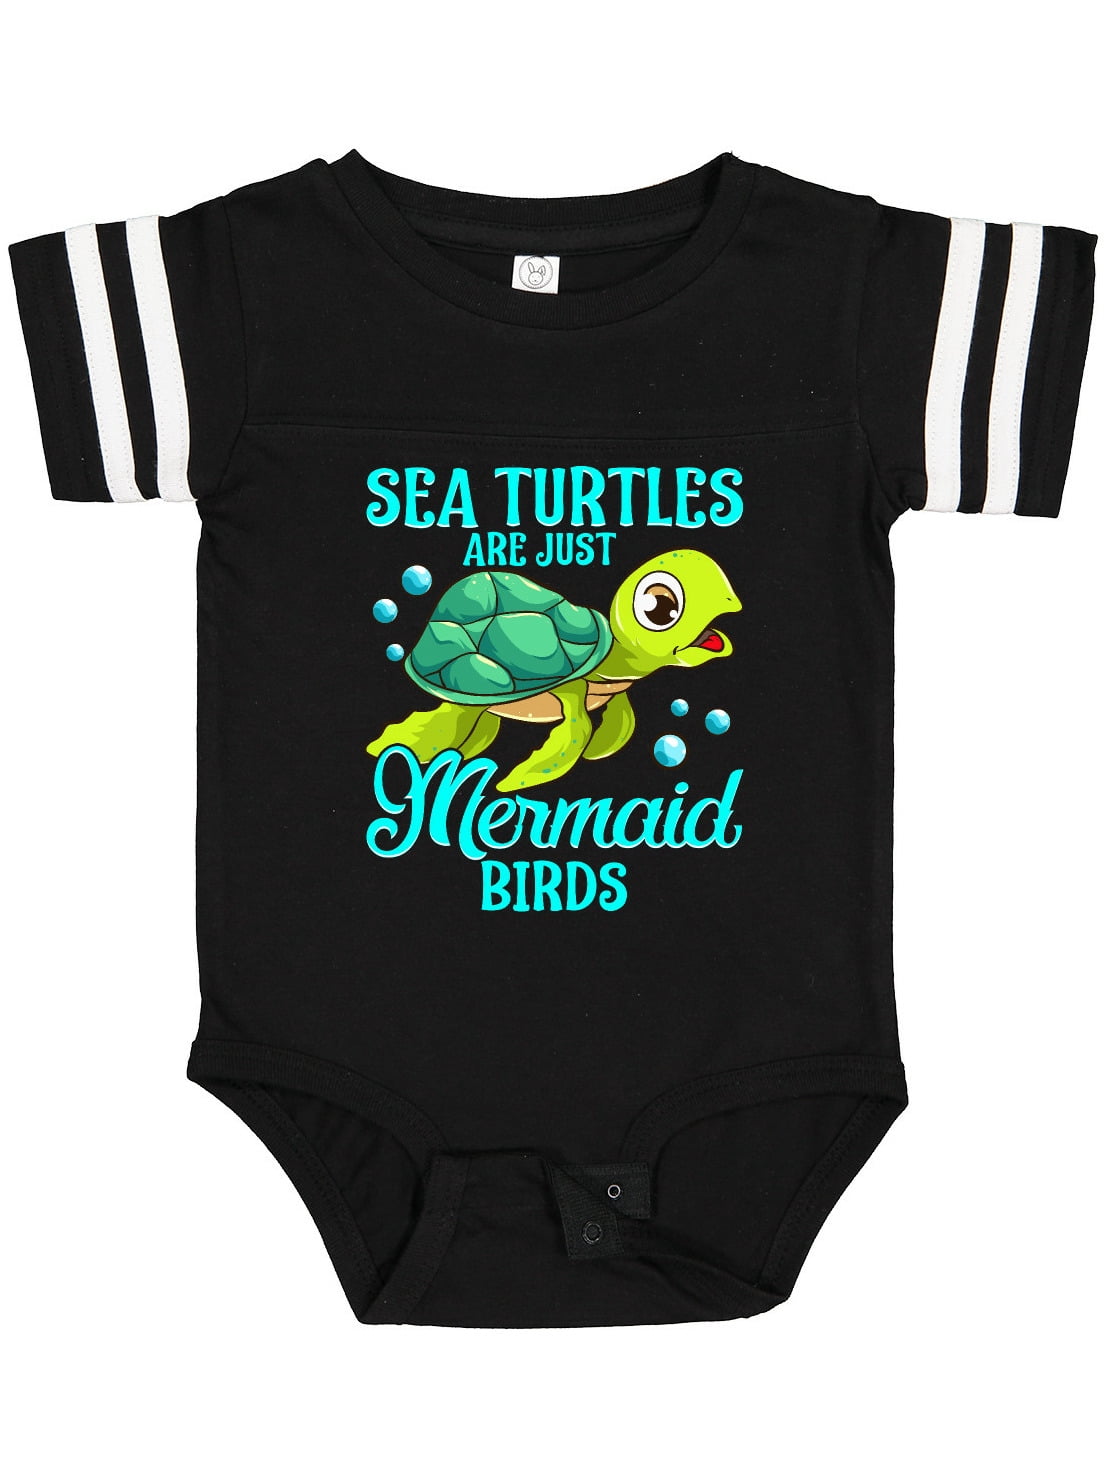 Sea Turtle Galaxy Outer Infant Baby Short Sleeve Romper Jumpsuit Bodysuit